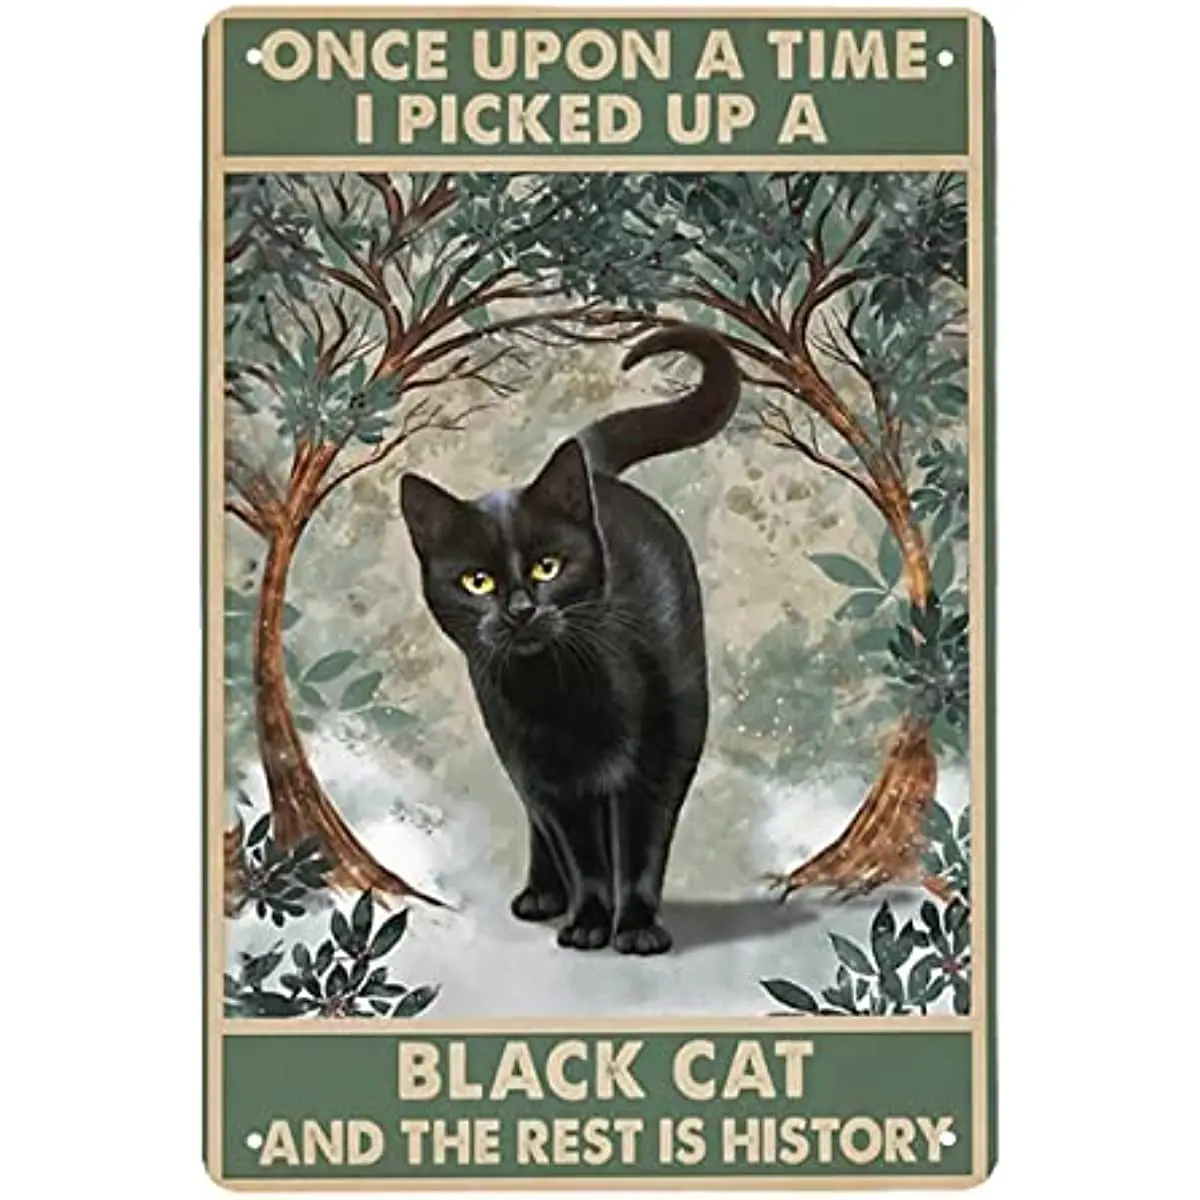 

Vintage Metal Tin Sign Once Upon a Time I Picked Up a Black Cat and The Rest is History Retro Metal Tin Sign for Home Wall Decor